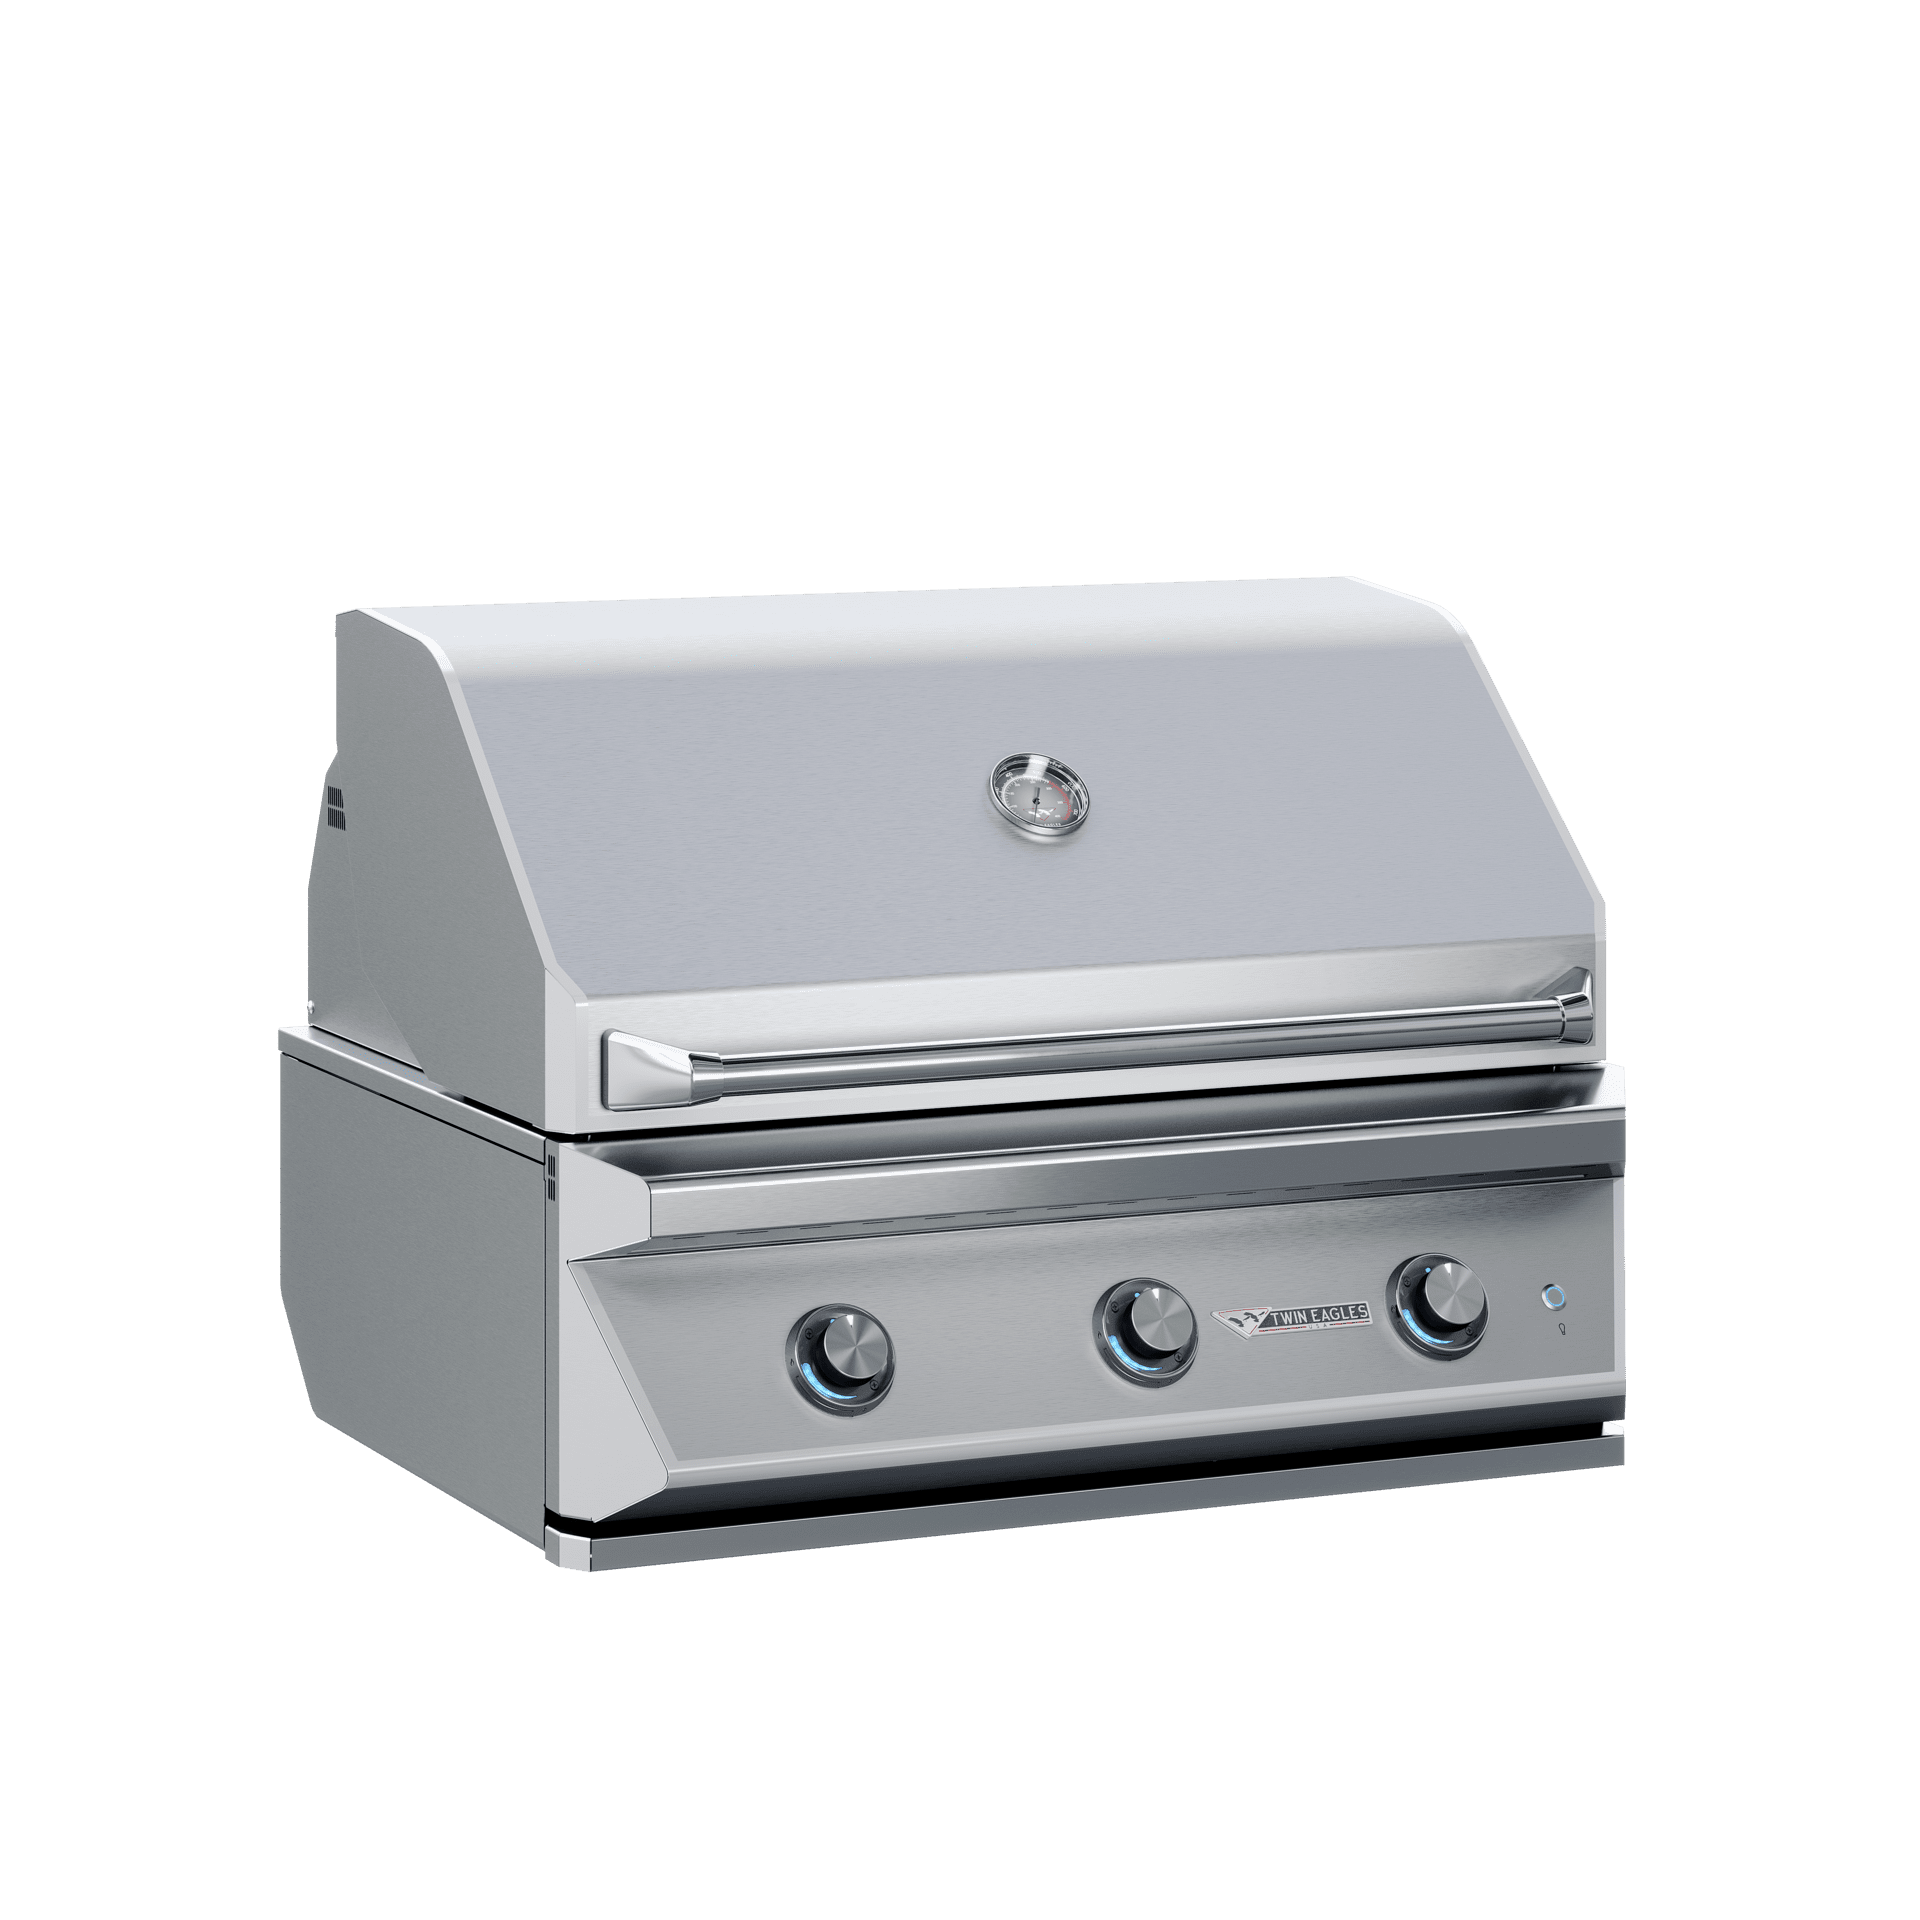 Twin Eagles Grills by Dometic